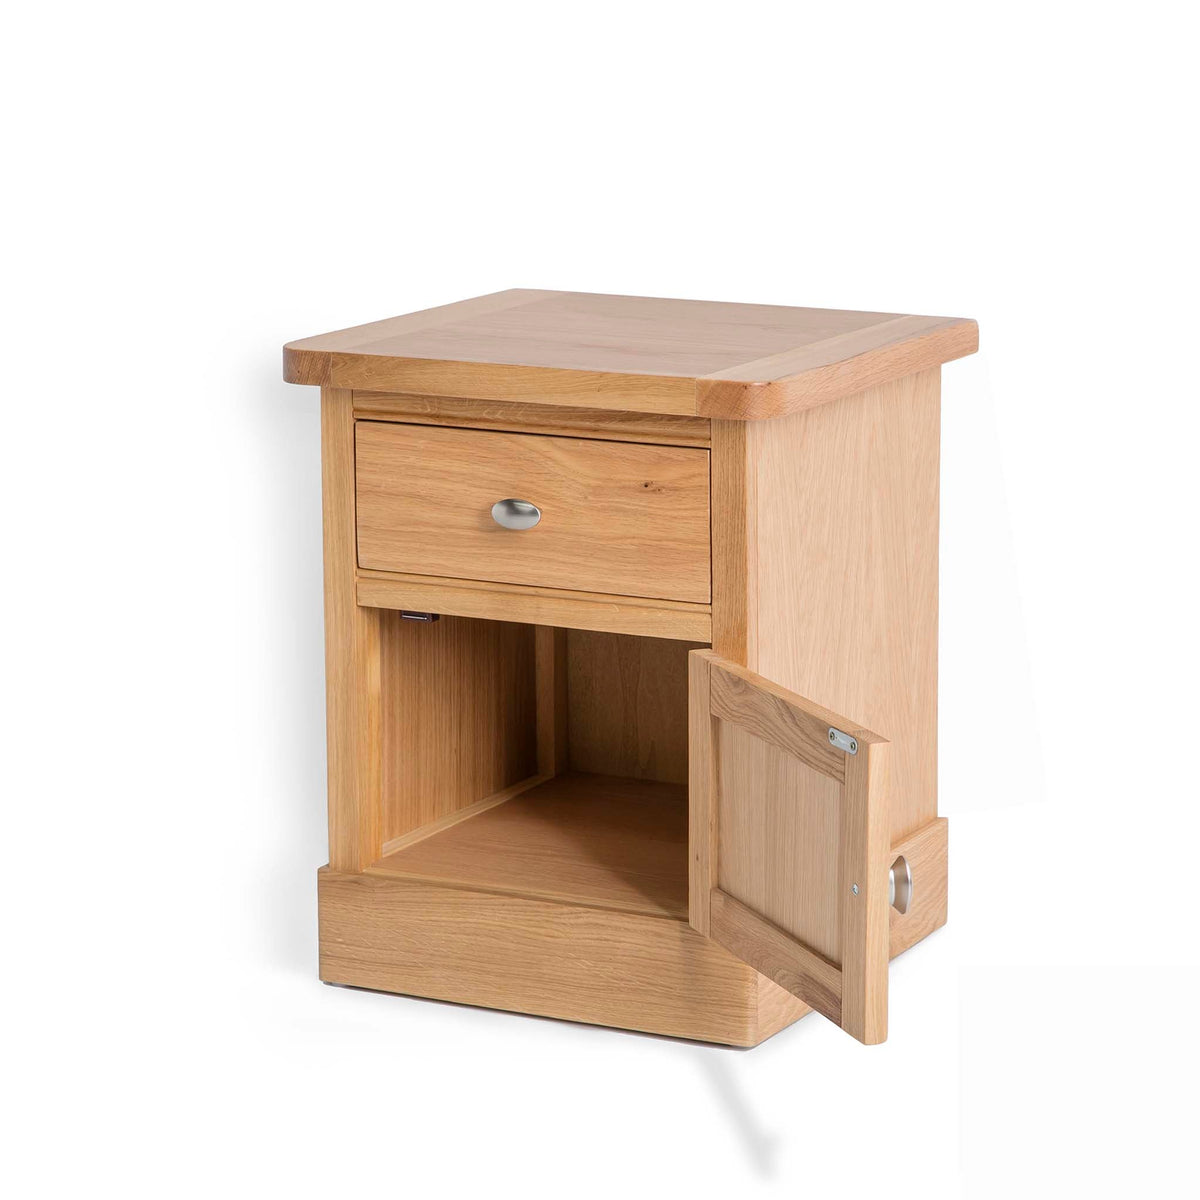 Hampshire Oak Lamp Table - Side view with door open with view of inside cupboard